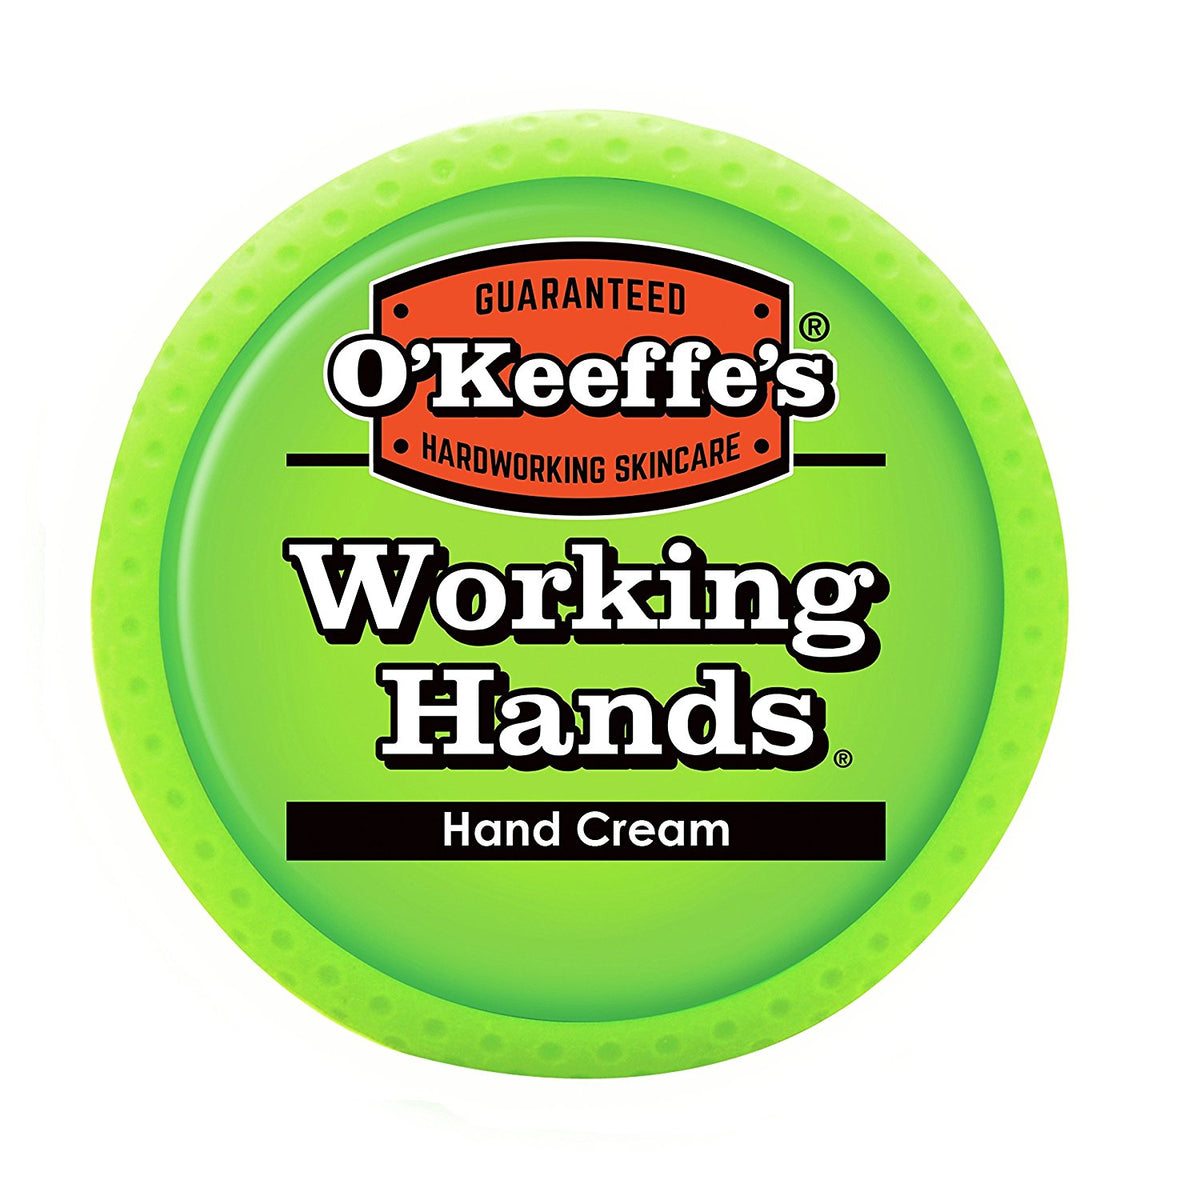 O'Keeffe's K0350007 Working Hands Non-Greasy Hand Cream, Concentrated, 3.4 Oz